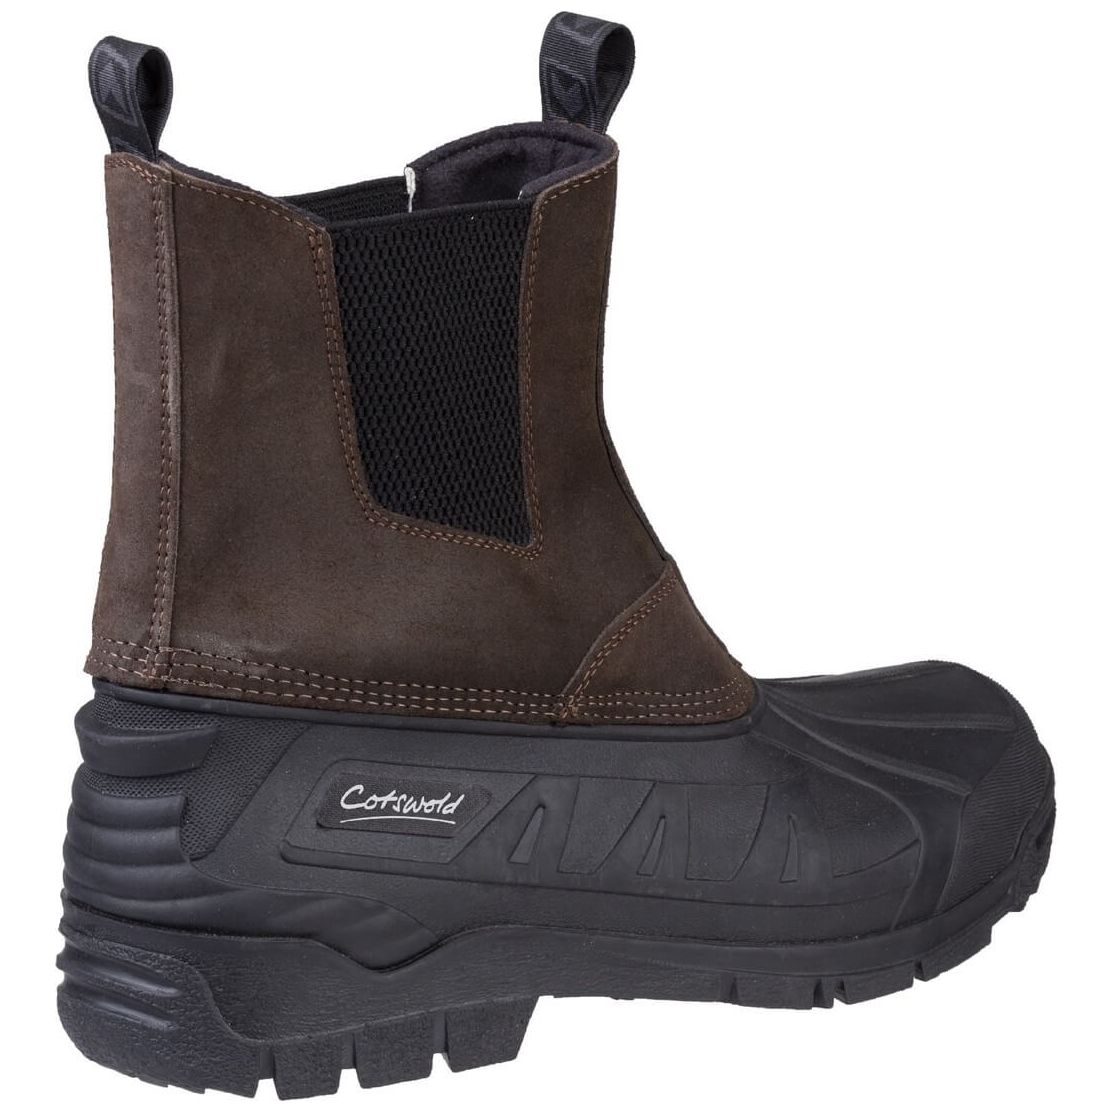 Cotswold Whiteway Hybrid Dealer Boots-Brown-2